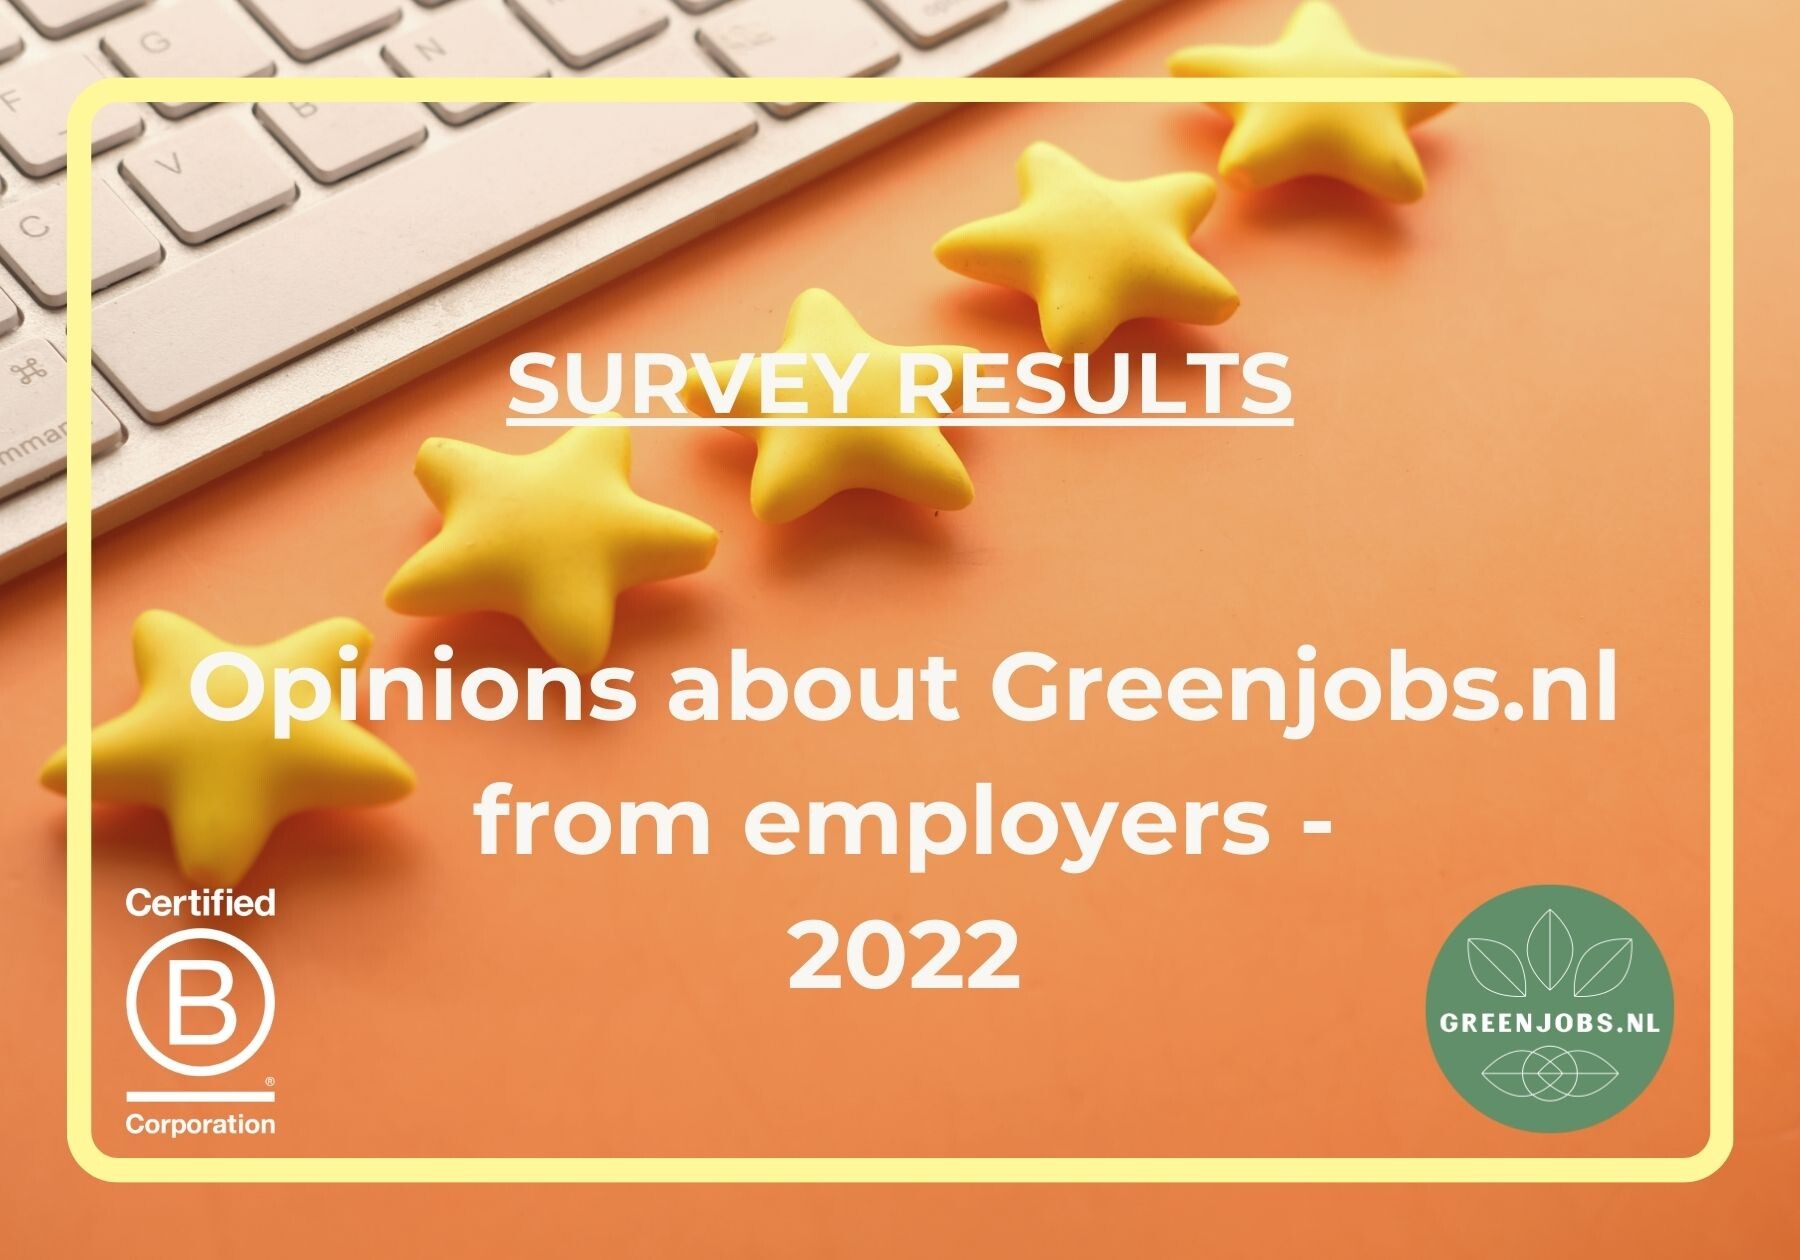 Survey results - Opinions from employers about Greenjobs.nl